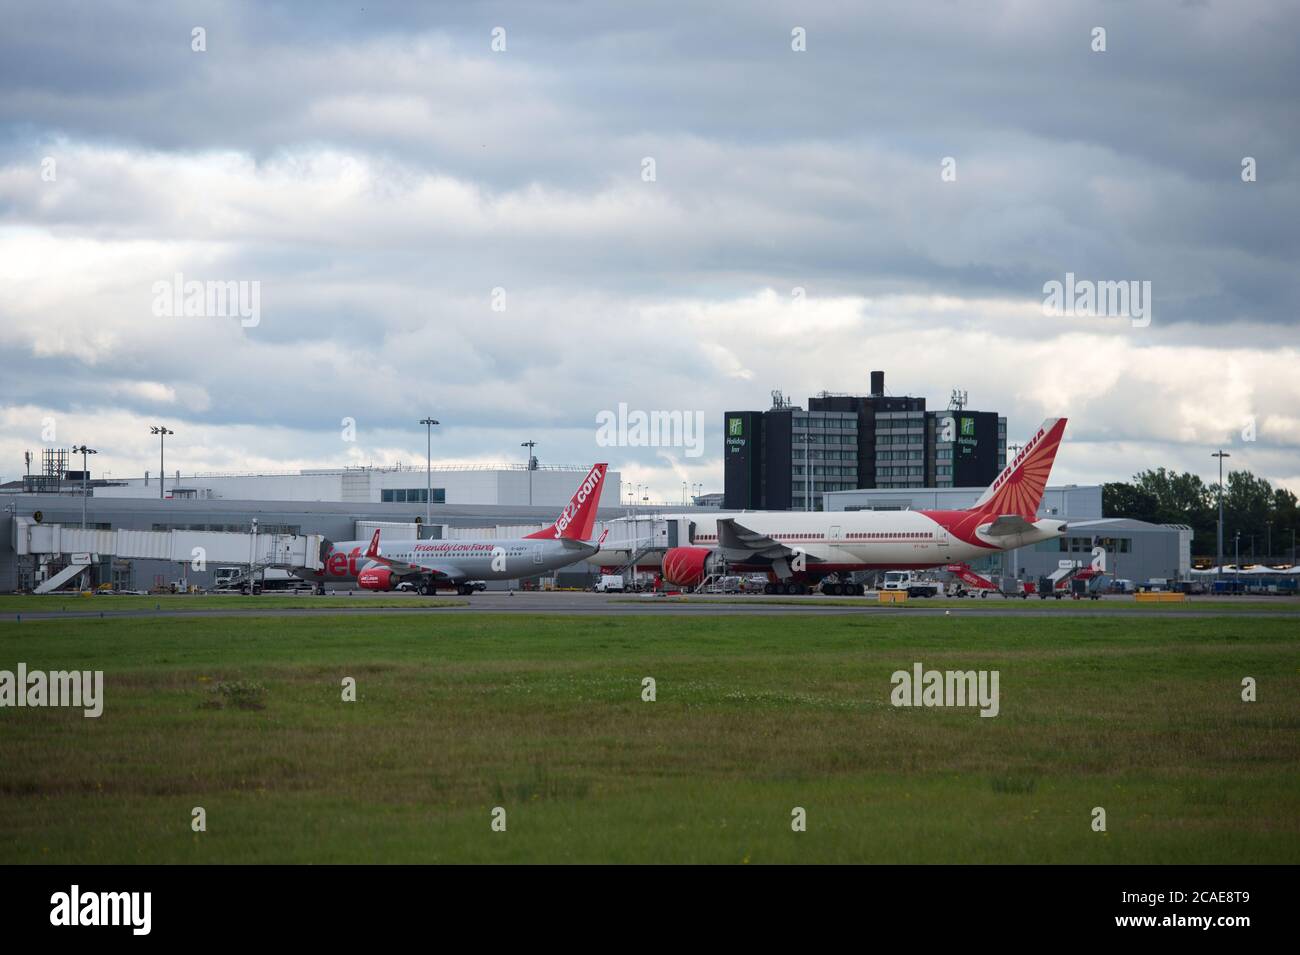 Glasgow, Scotland, UK. 6th Aug, 2020. Pictured: Air India Flight AI1133 from Mumbai lands at Glasgow International Airport transporting a film crew and cast which already disembarked the plane earlier. The film crew who landed last night are to be quarantined for 14 days before starting filming in Ayrshire later this month with Bollywood blockbuster, Bell Bottom, where it's reported the 80s' thriller revolves around a plane hijacking. The plane is a Boeing 777-237(LR) aircraft. Credit: Colin Fisher/Alamy Live News Stock Photo